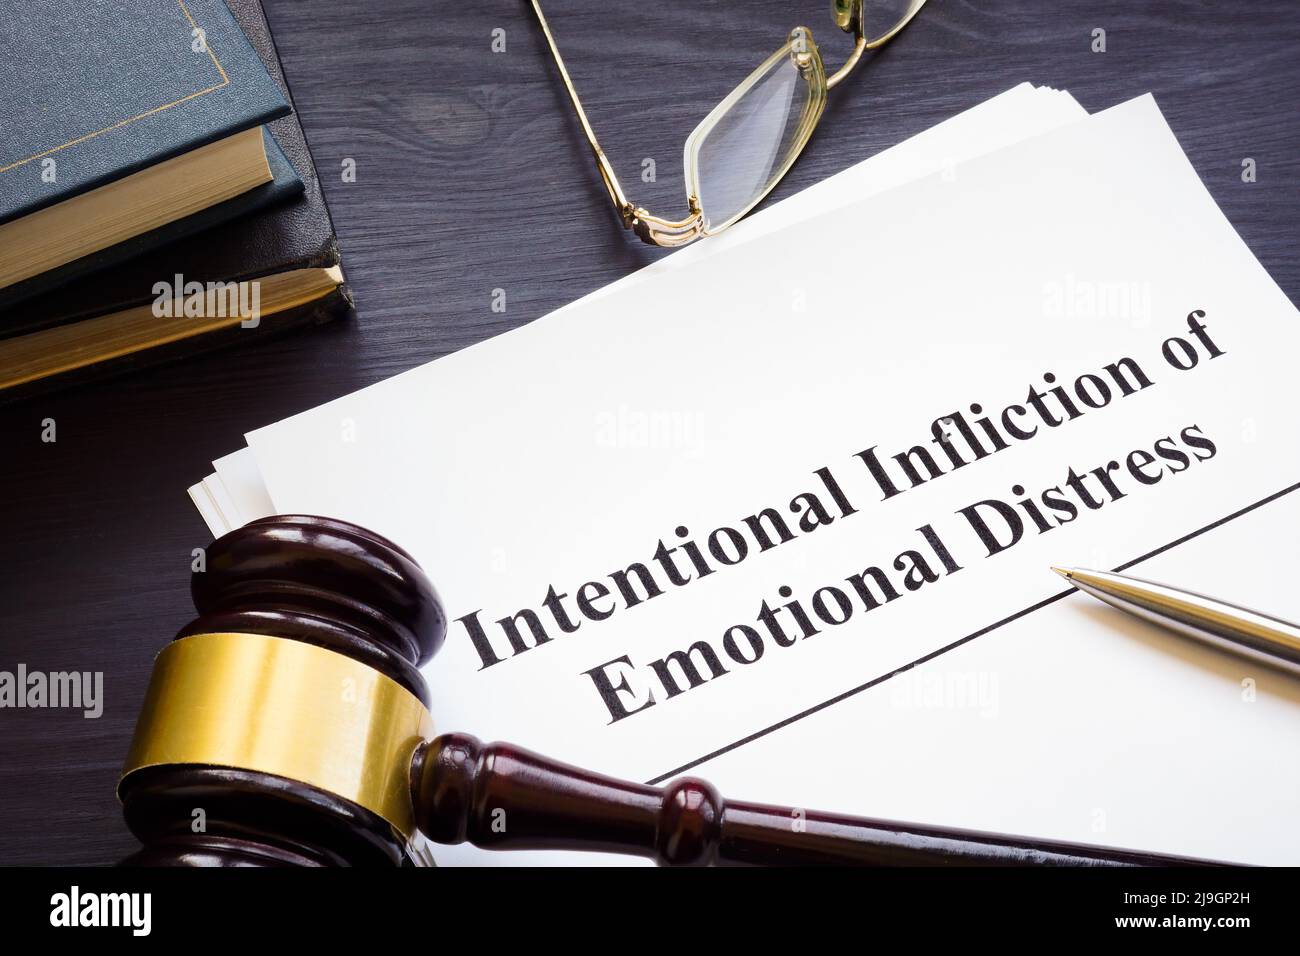 Papers about intentional infliction of emotional distress IIED and gavel. Stock Photo